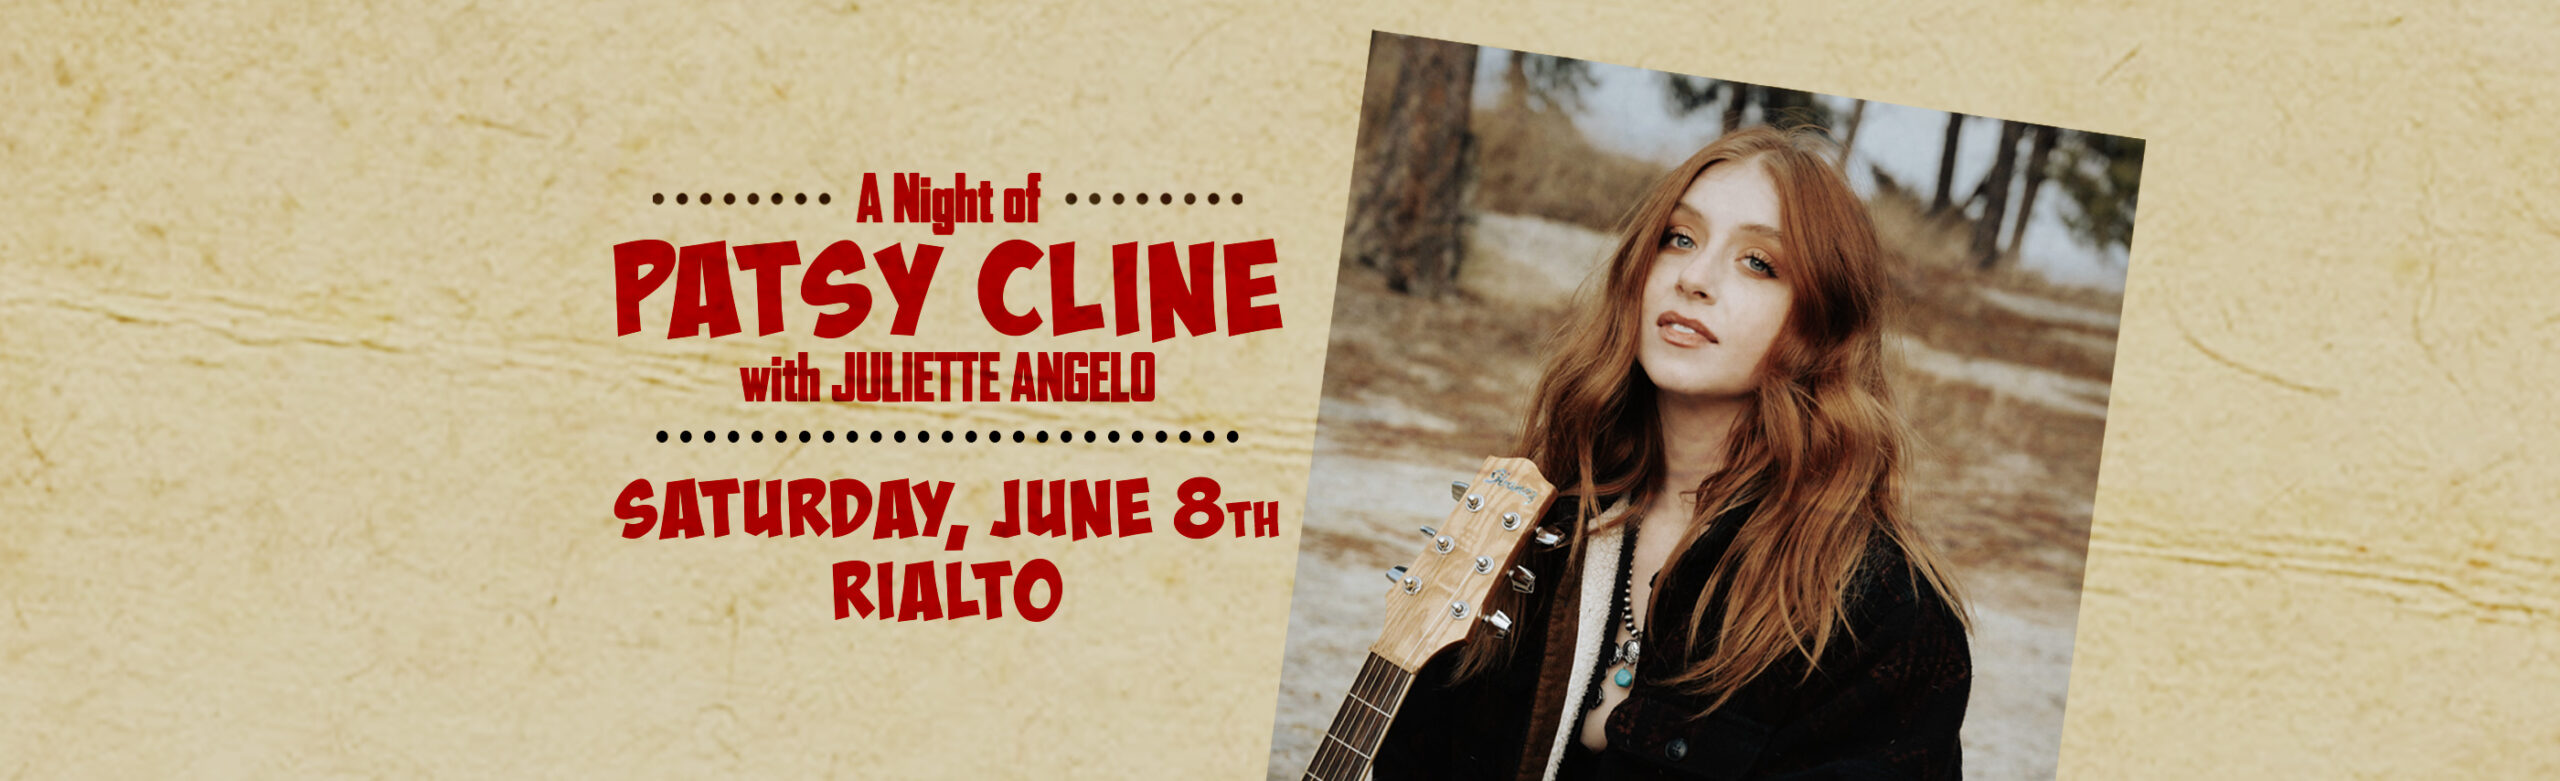 Experience “A Night of Patsy Cline” with Juliette Angelo at the Rialto Image